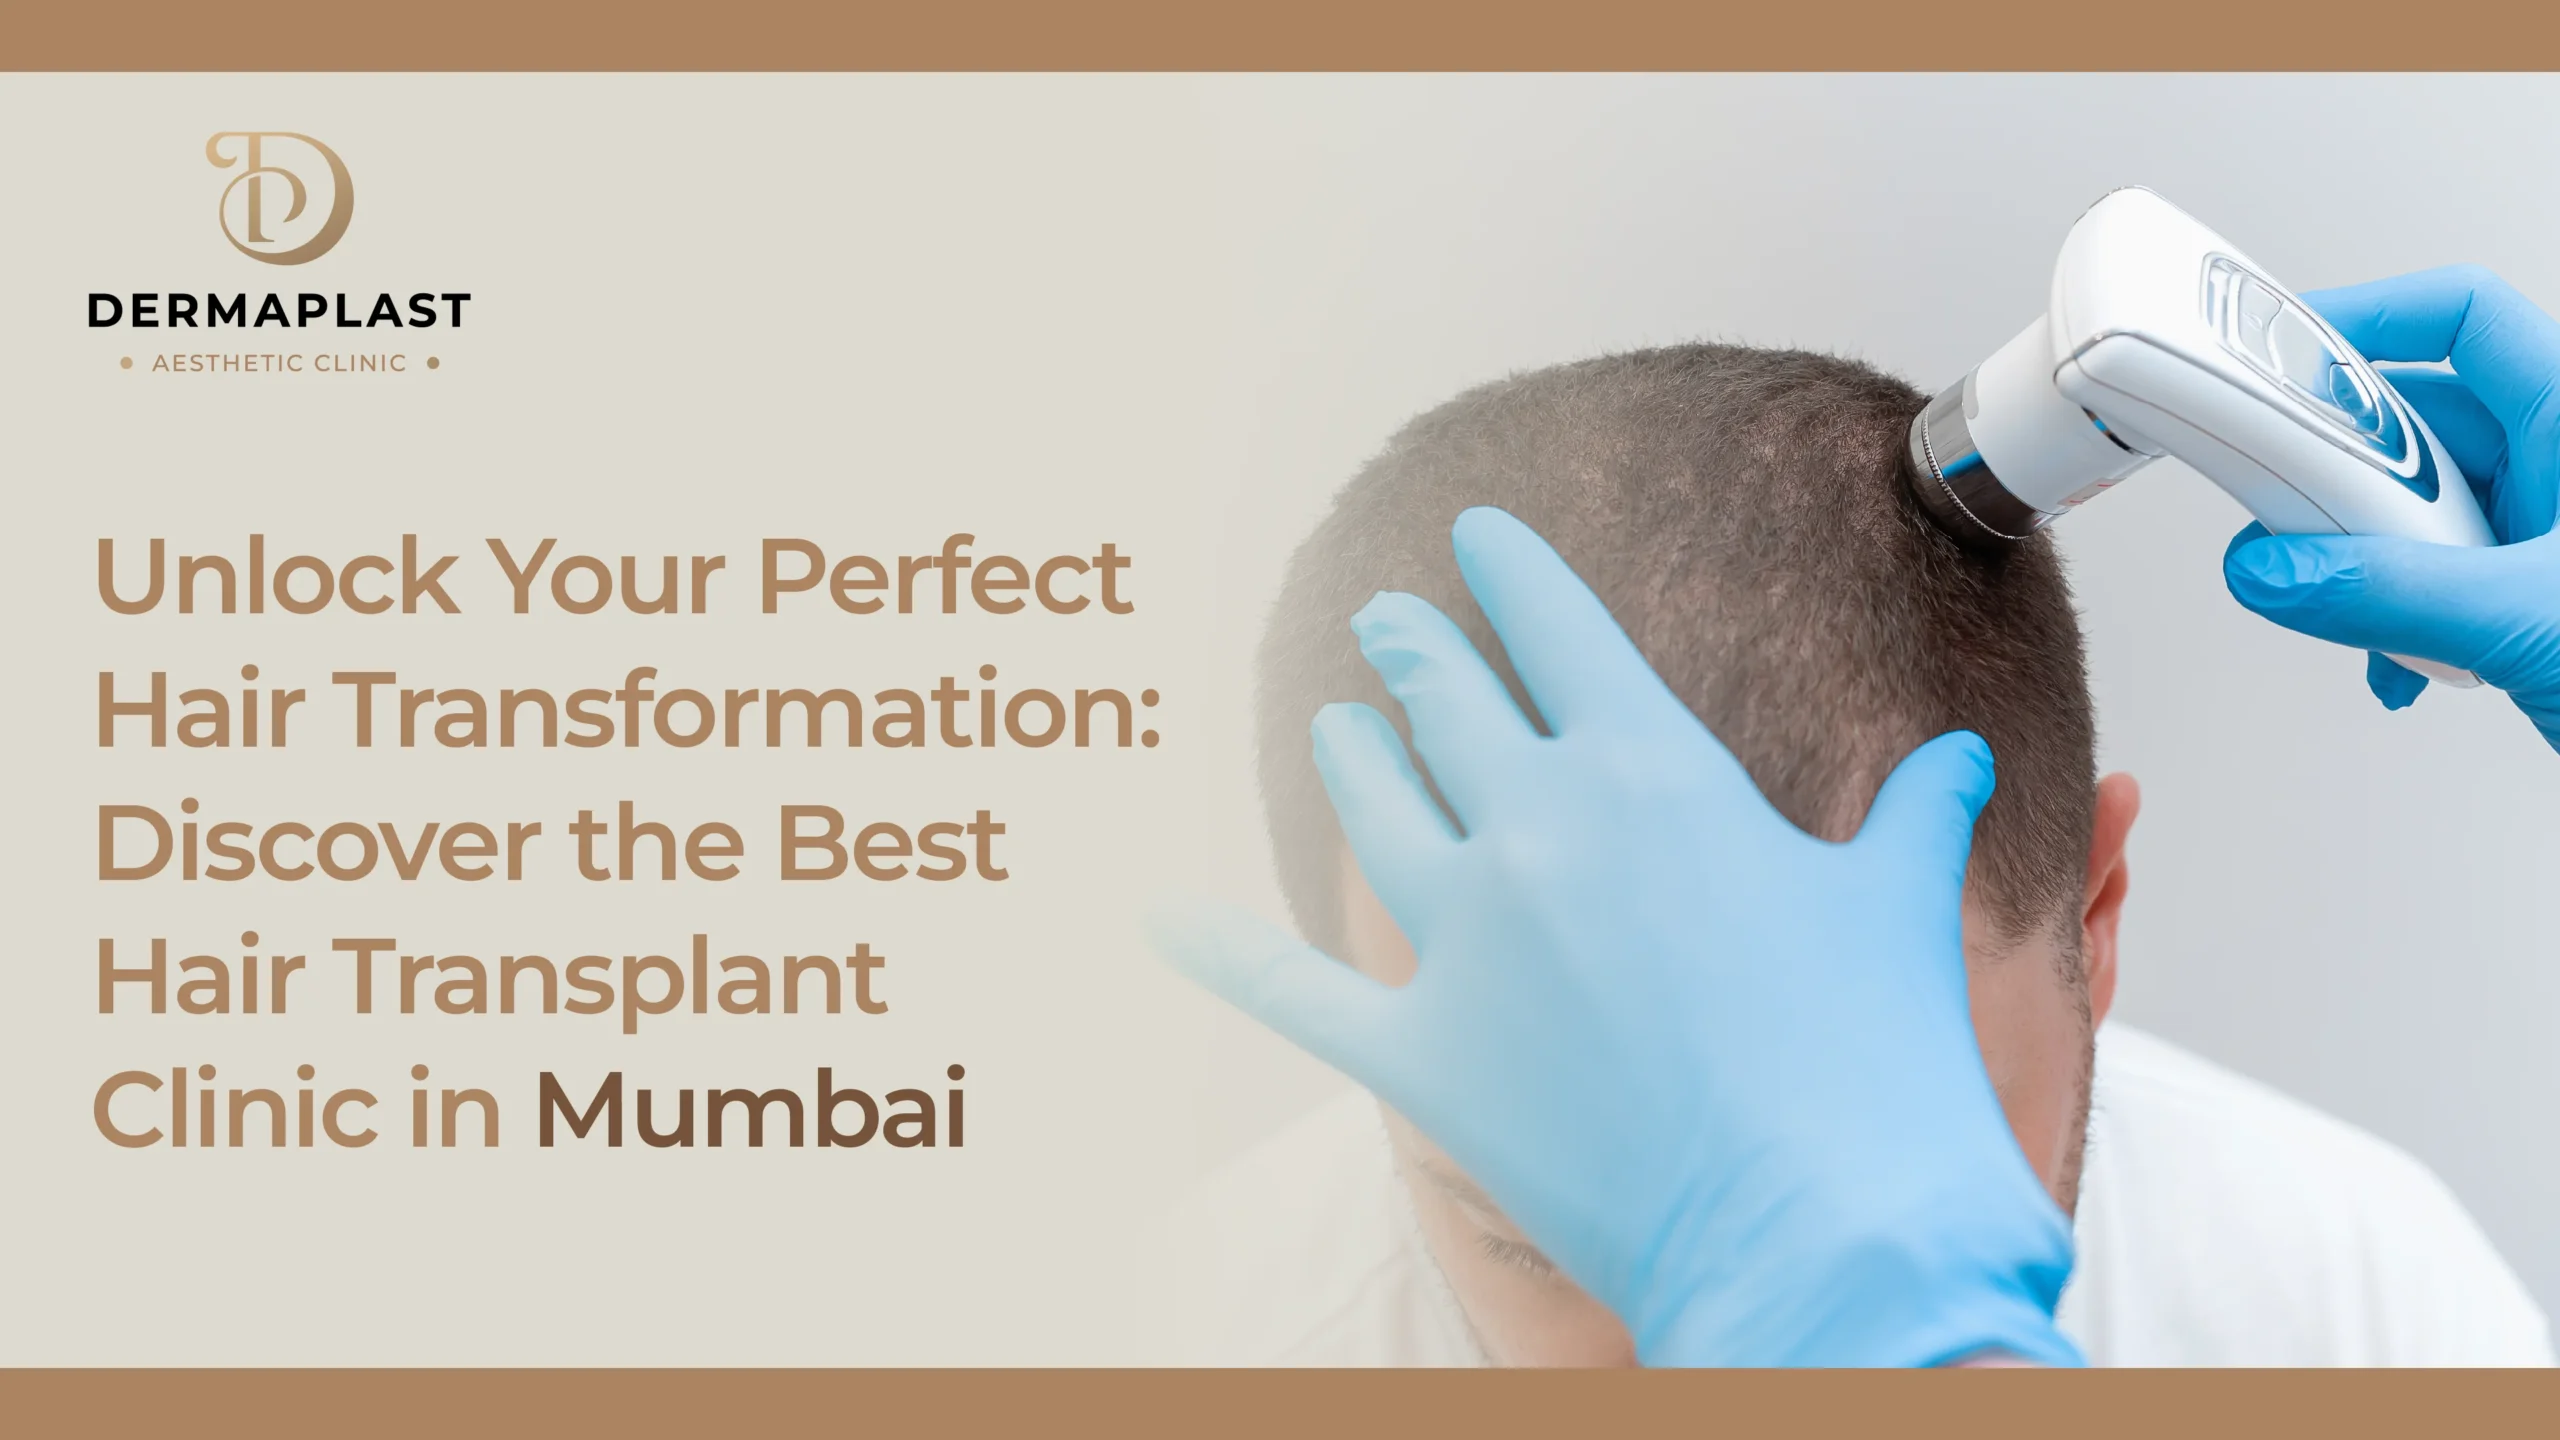 Unlock Your Perfect Hair Transformation: Discover the Best Hair Transplant Clinic in Mumbai